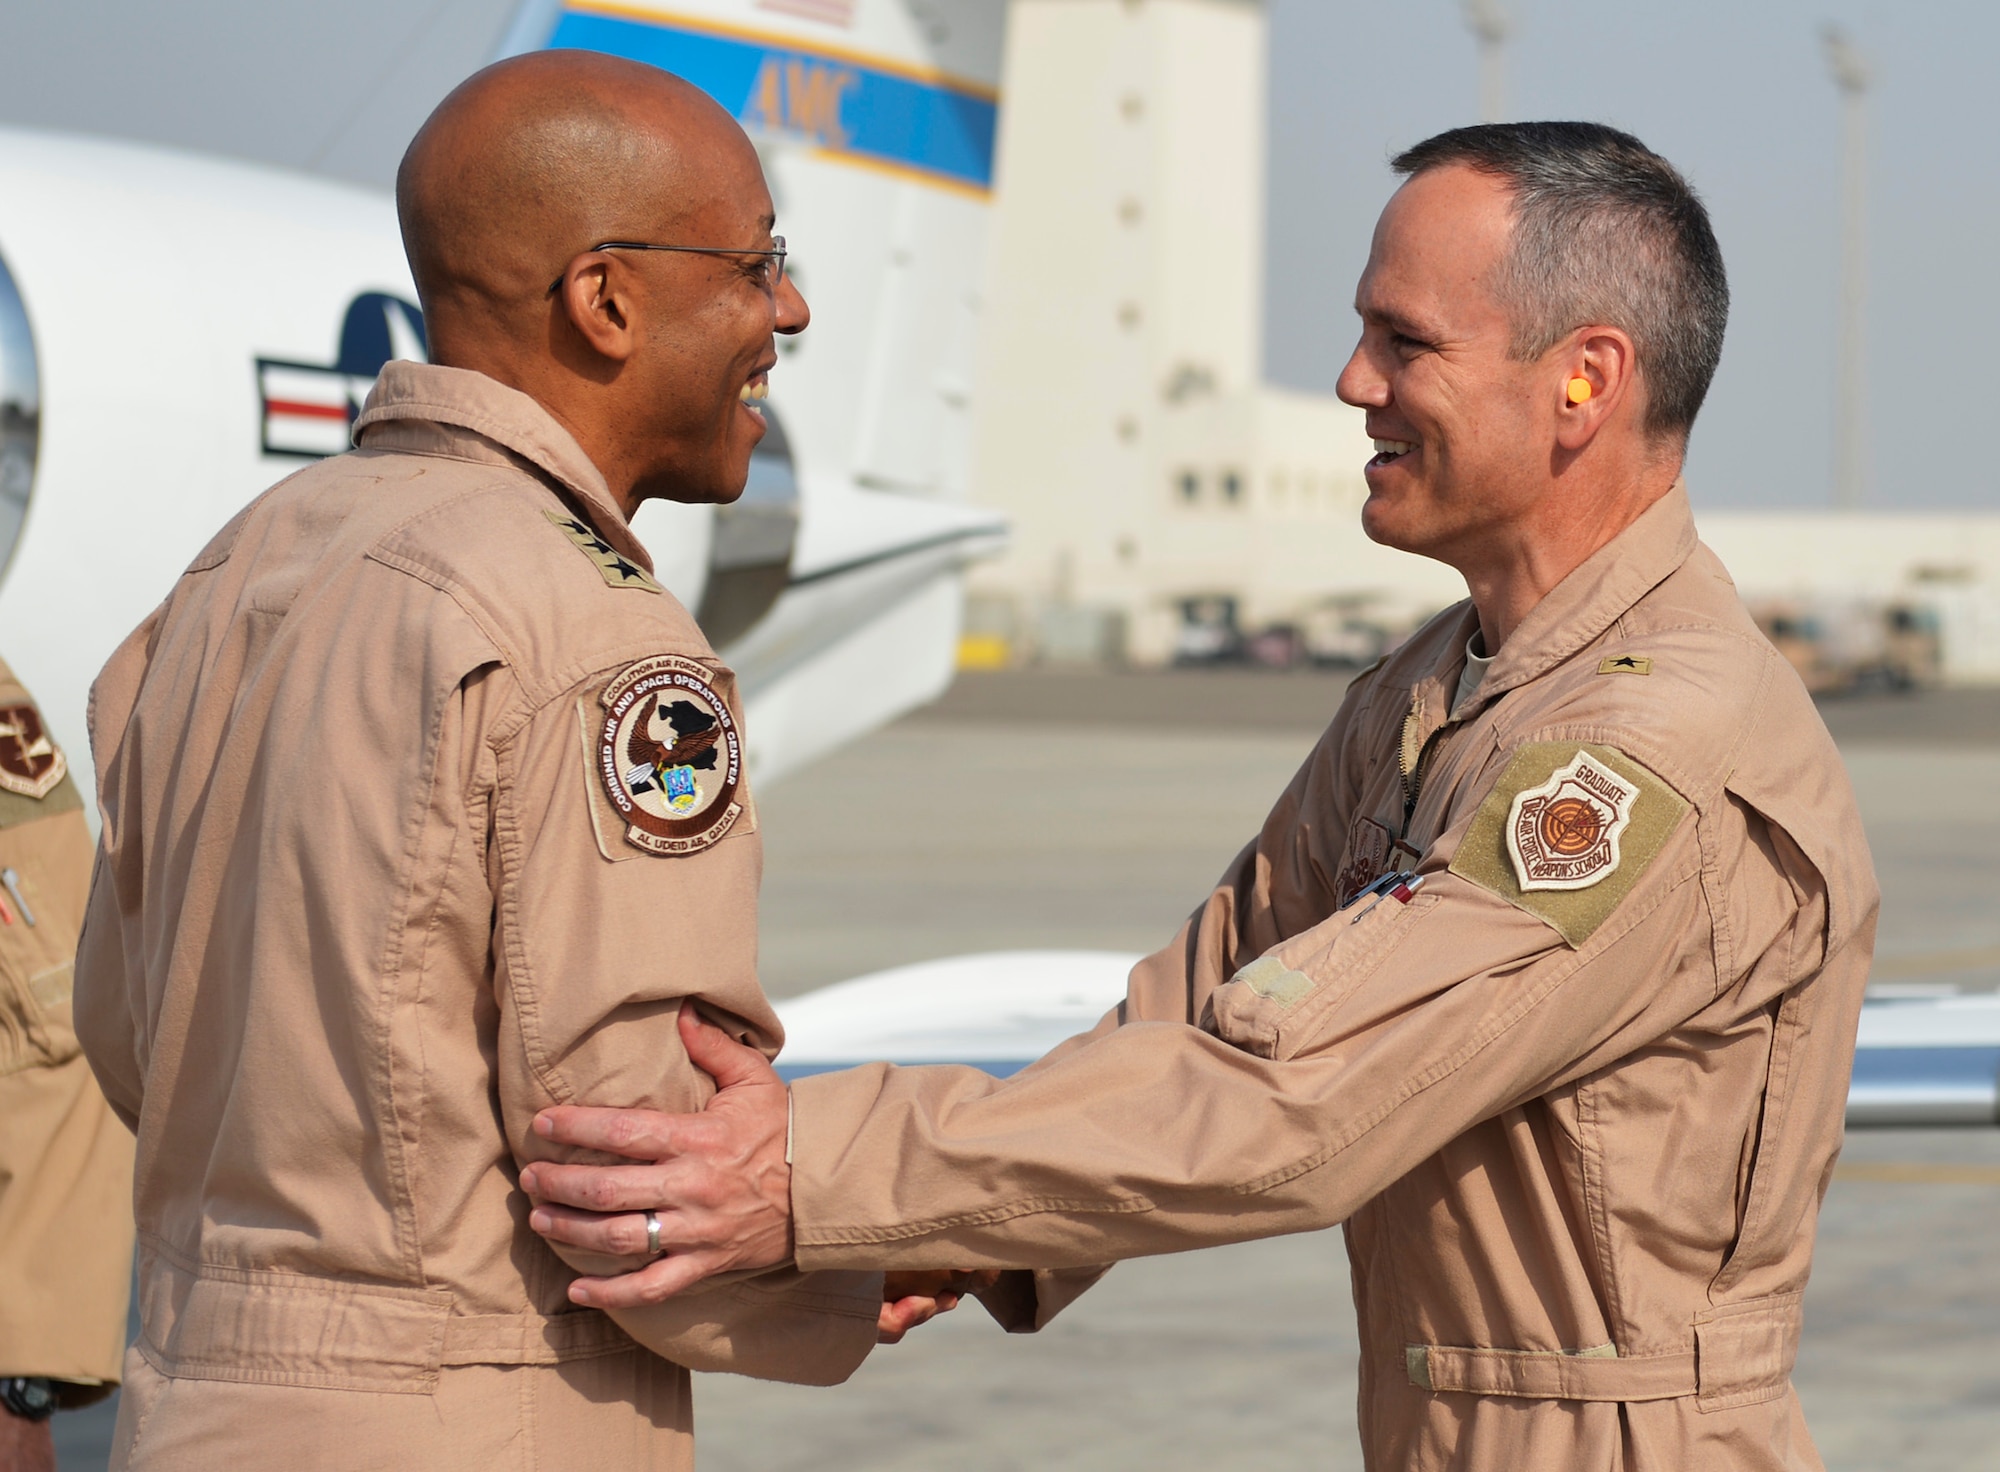 Brig. Gen. Charles Corcoran, 380th Air Expeditionary Wing commander, right, greets Lt. Gen. Charles Q. Brown, Jr., U.S. Air Forces Central Command commander, upon his arrival at an undisclosed location in Southwest Asia June 28, 2016. Brown visited the location to interact with members of the wing and to officiate over the 380th AEW change of command ceremony. (U.S. Air Force photo by Tech. Sgt. Chad Warren)